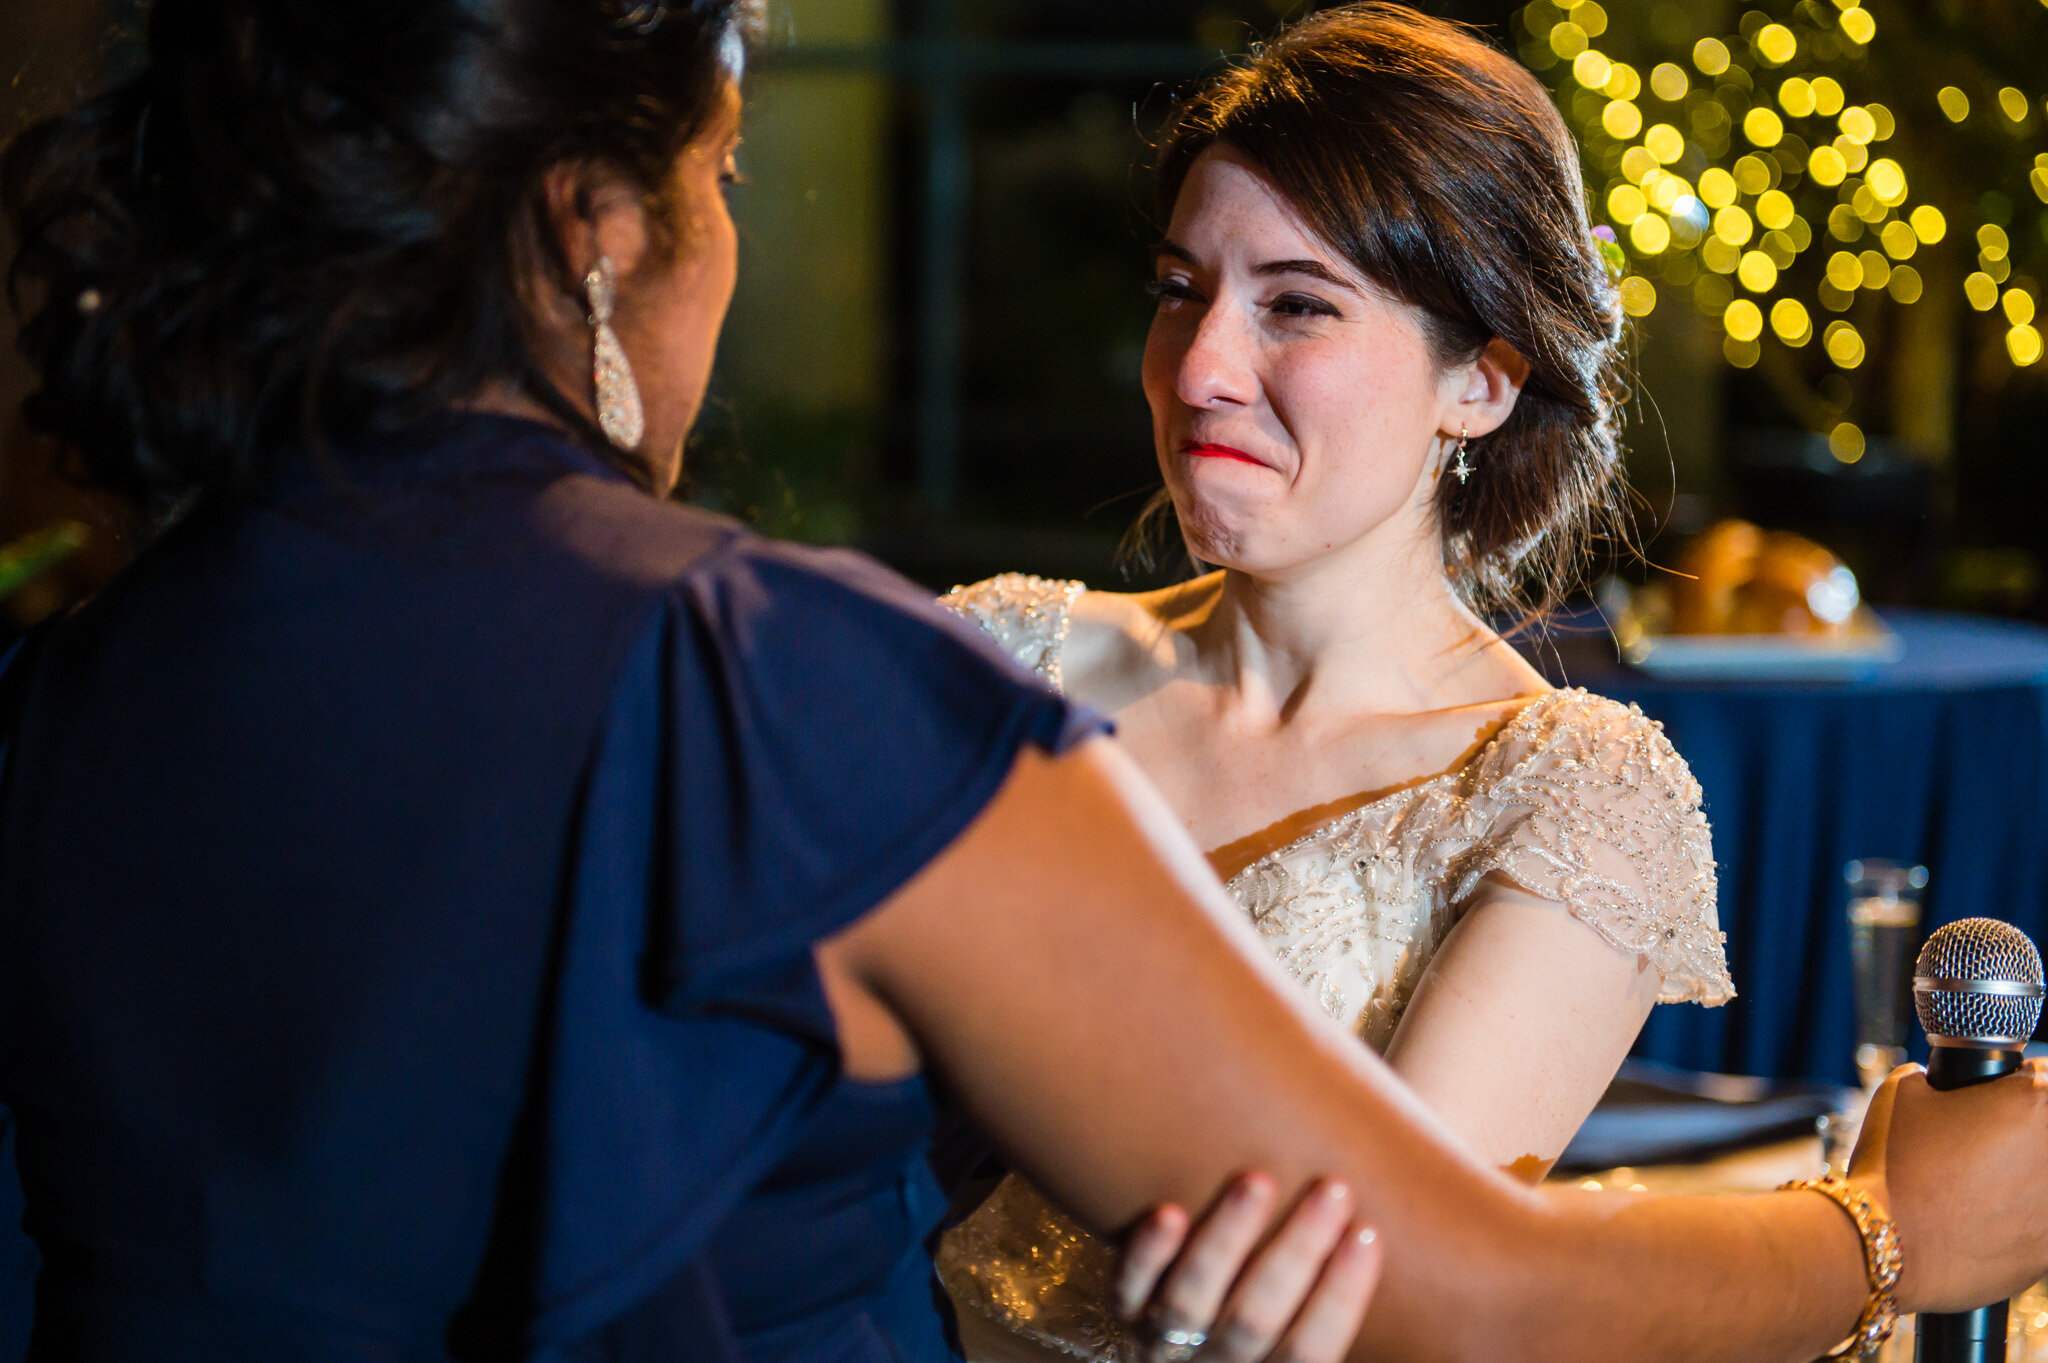 The bride gives her maid-of-honor an emotional joy-filled hug